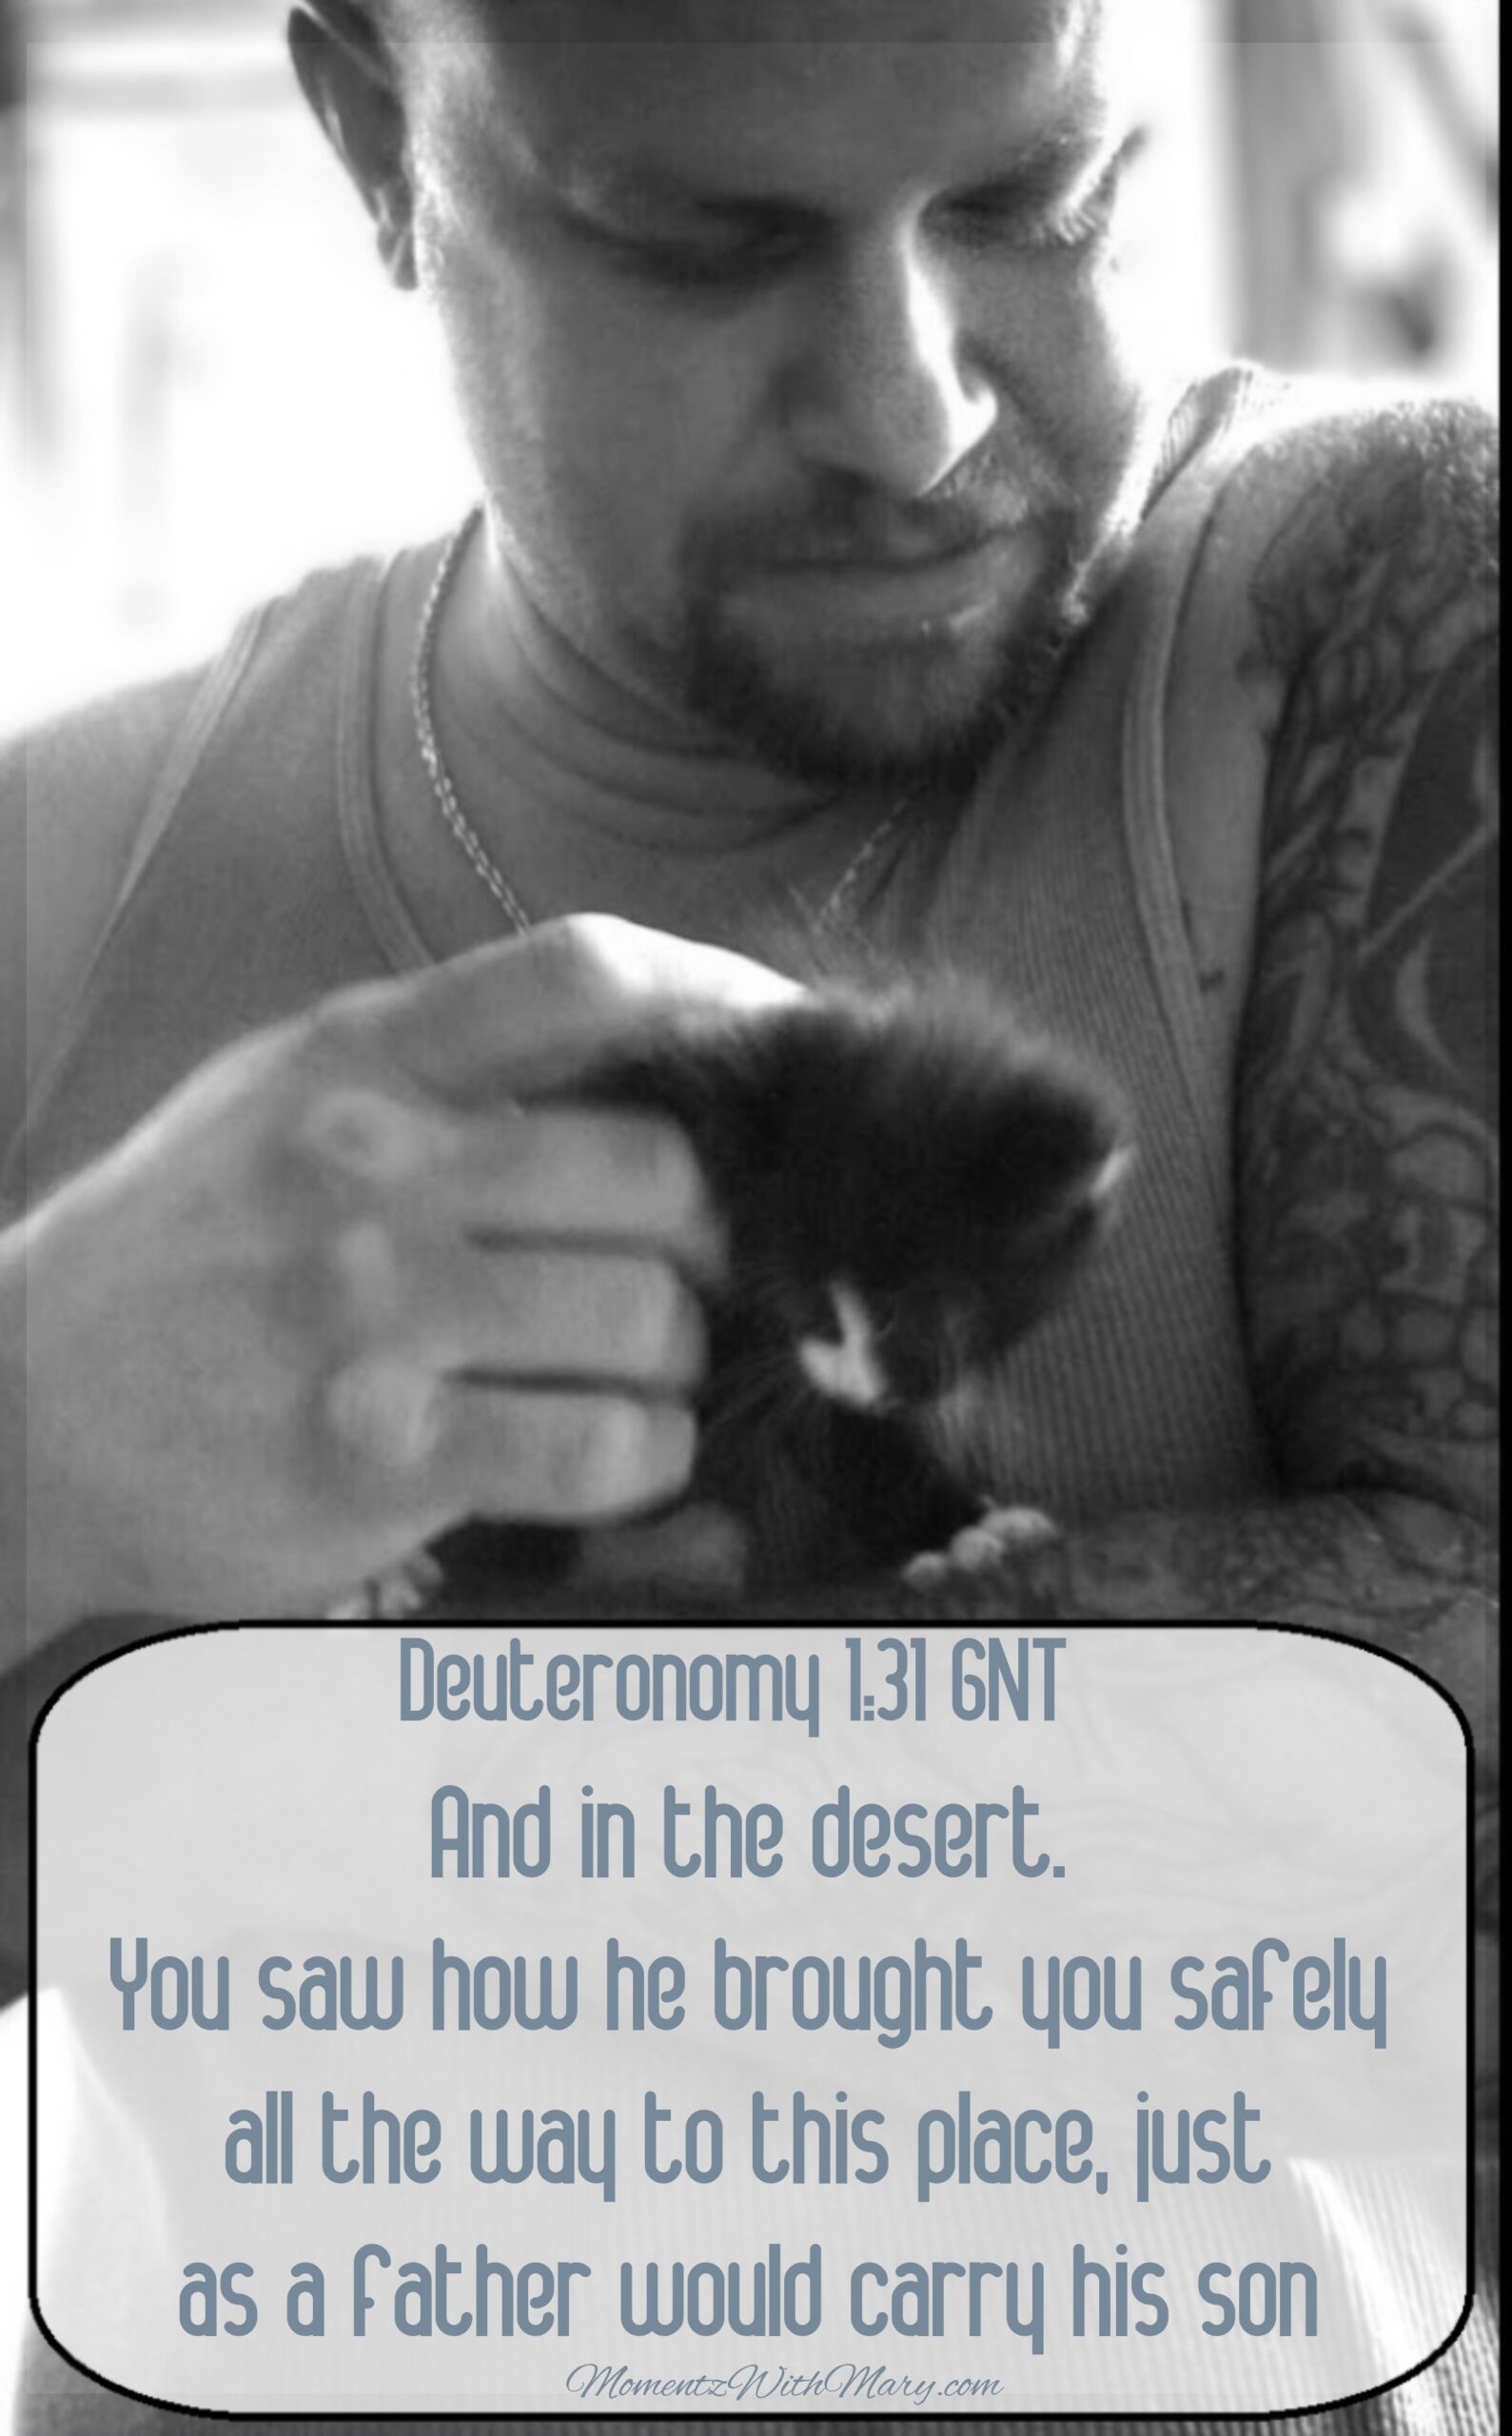 large man holding tiny kitten Deuteronomy 1:31 and in the desert. You saw how he brought you safely all the way to this place, just as a father would carry his son